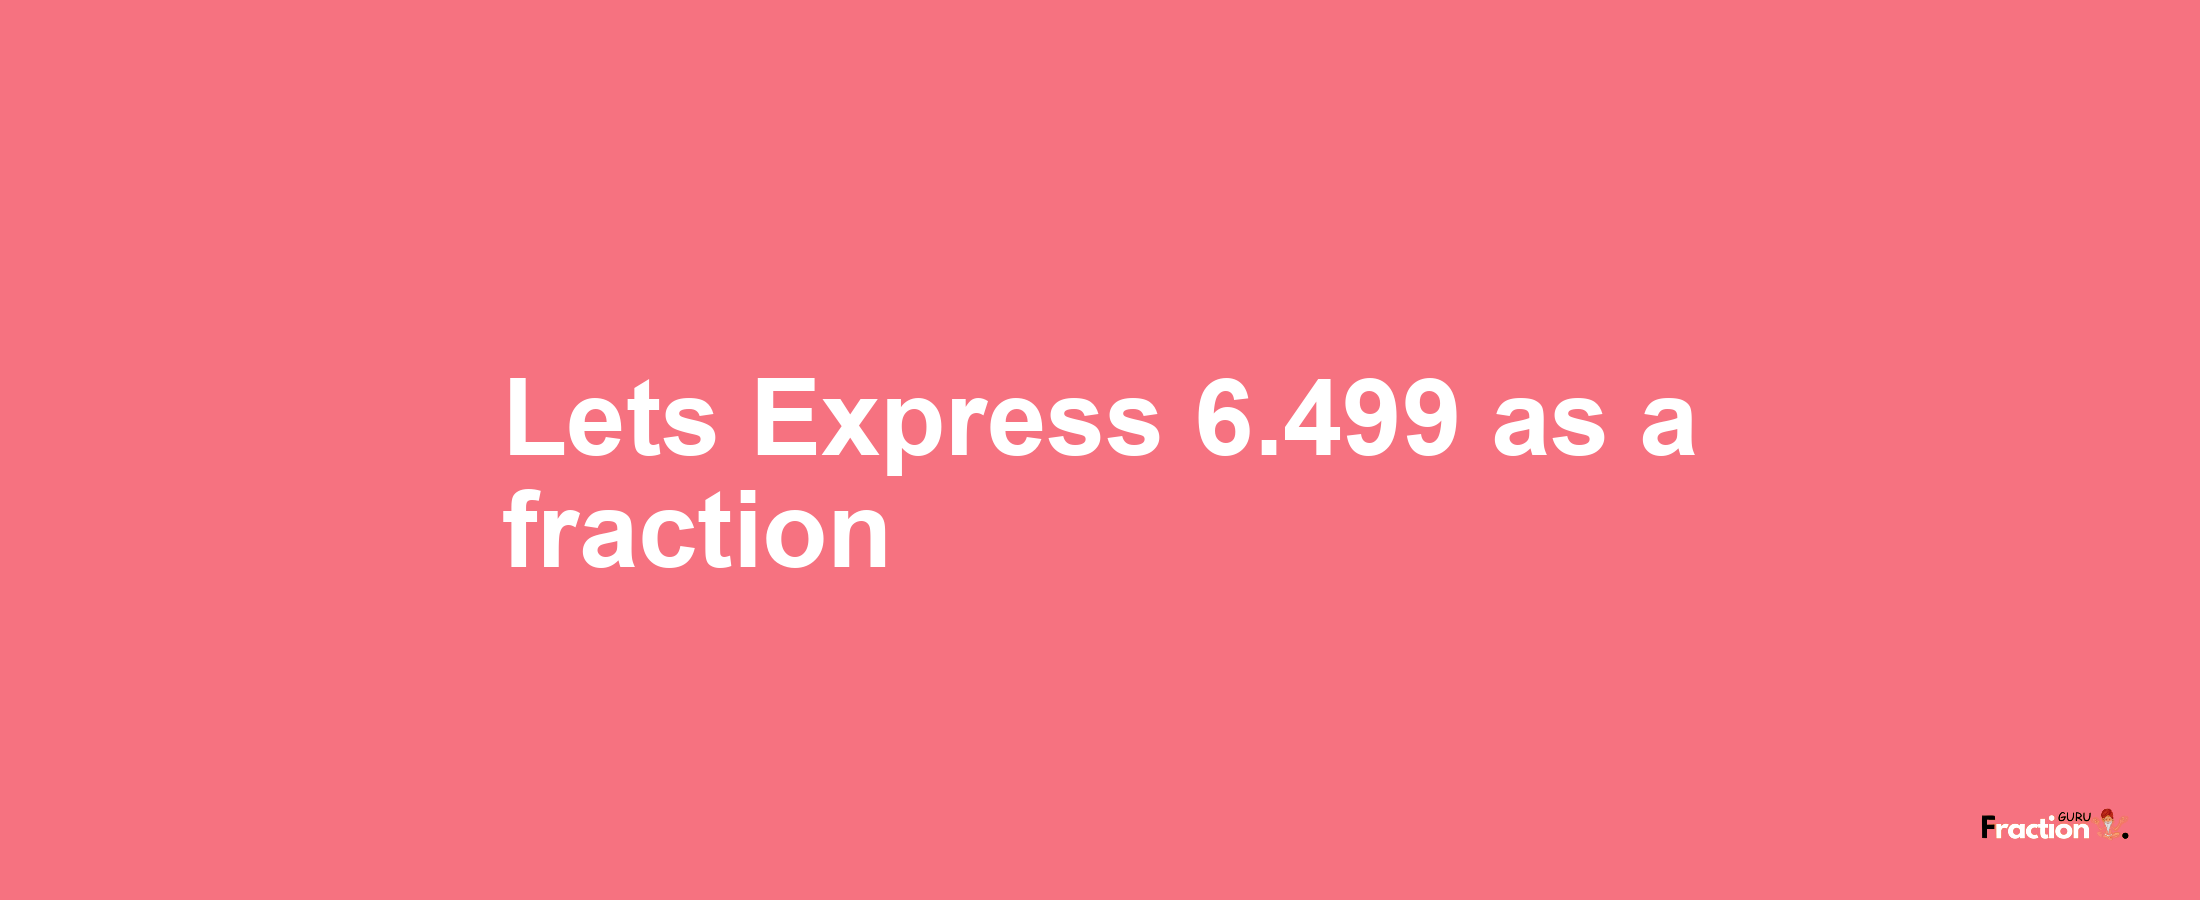 Lets Express 6.499 as afraction